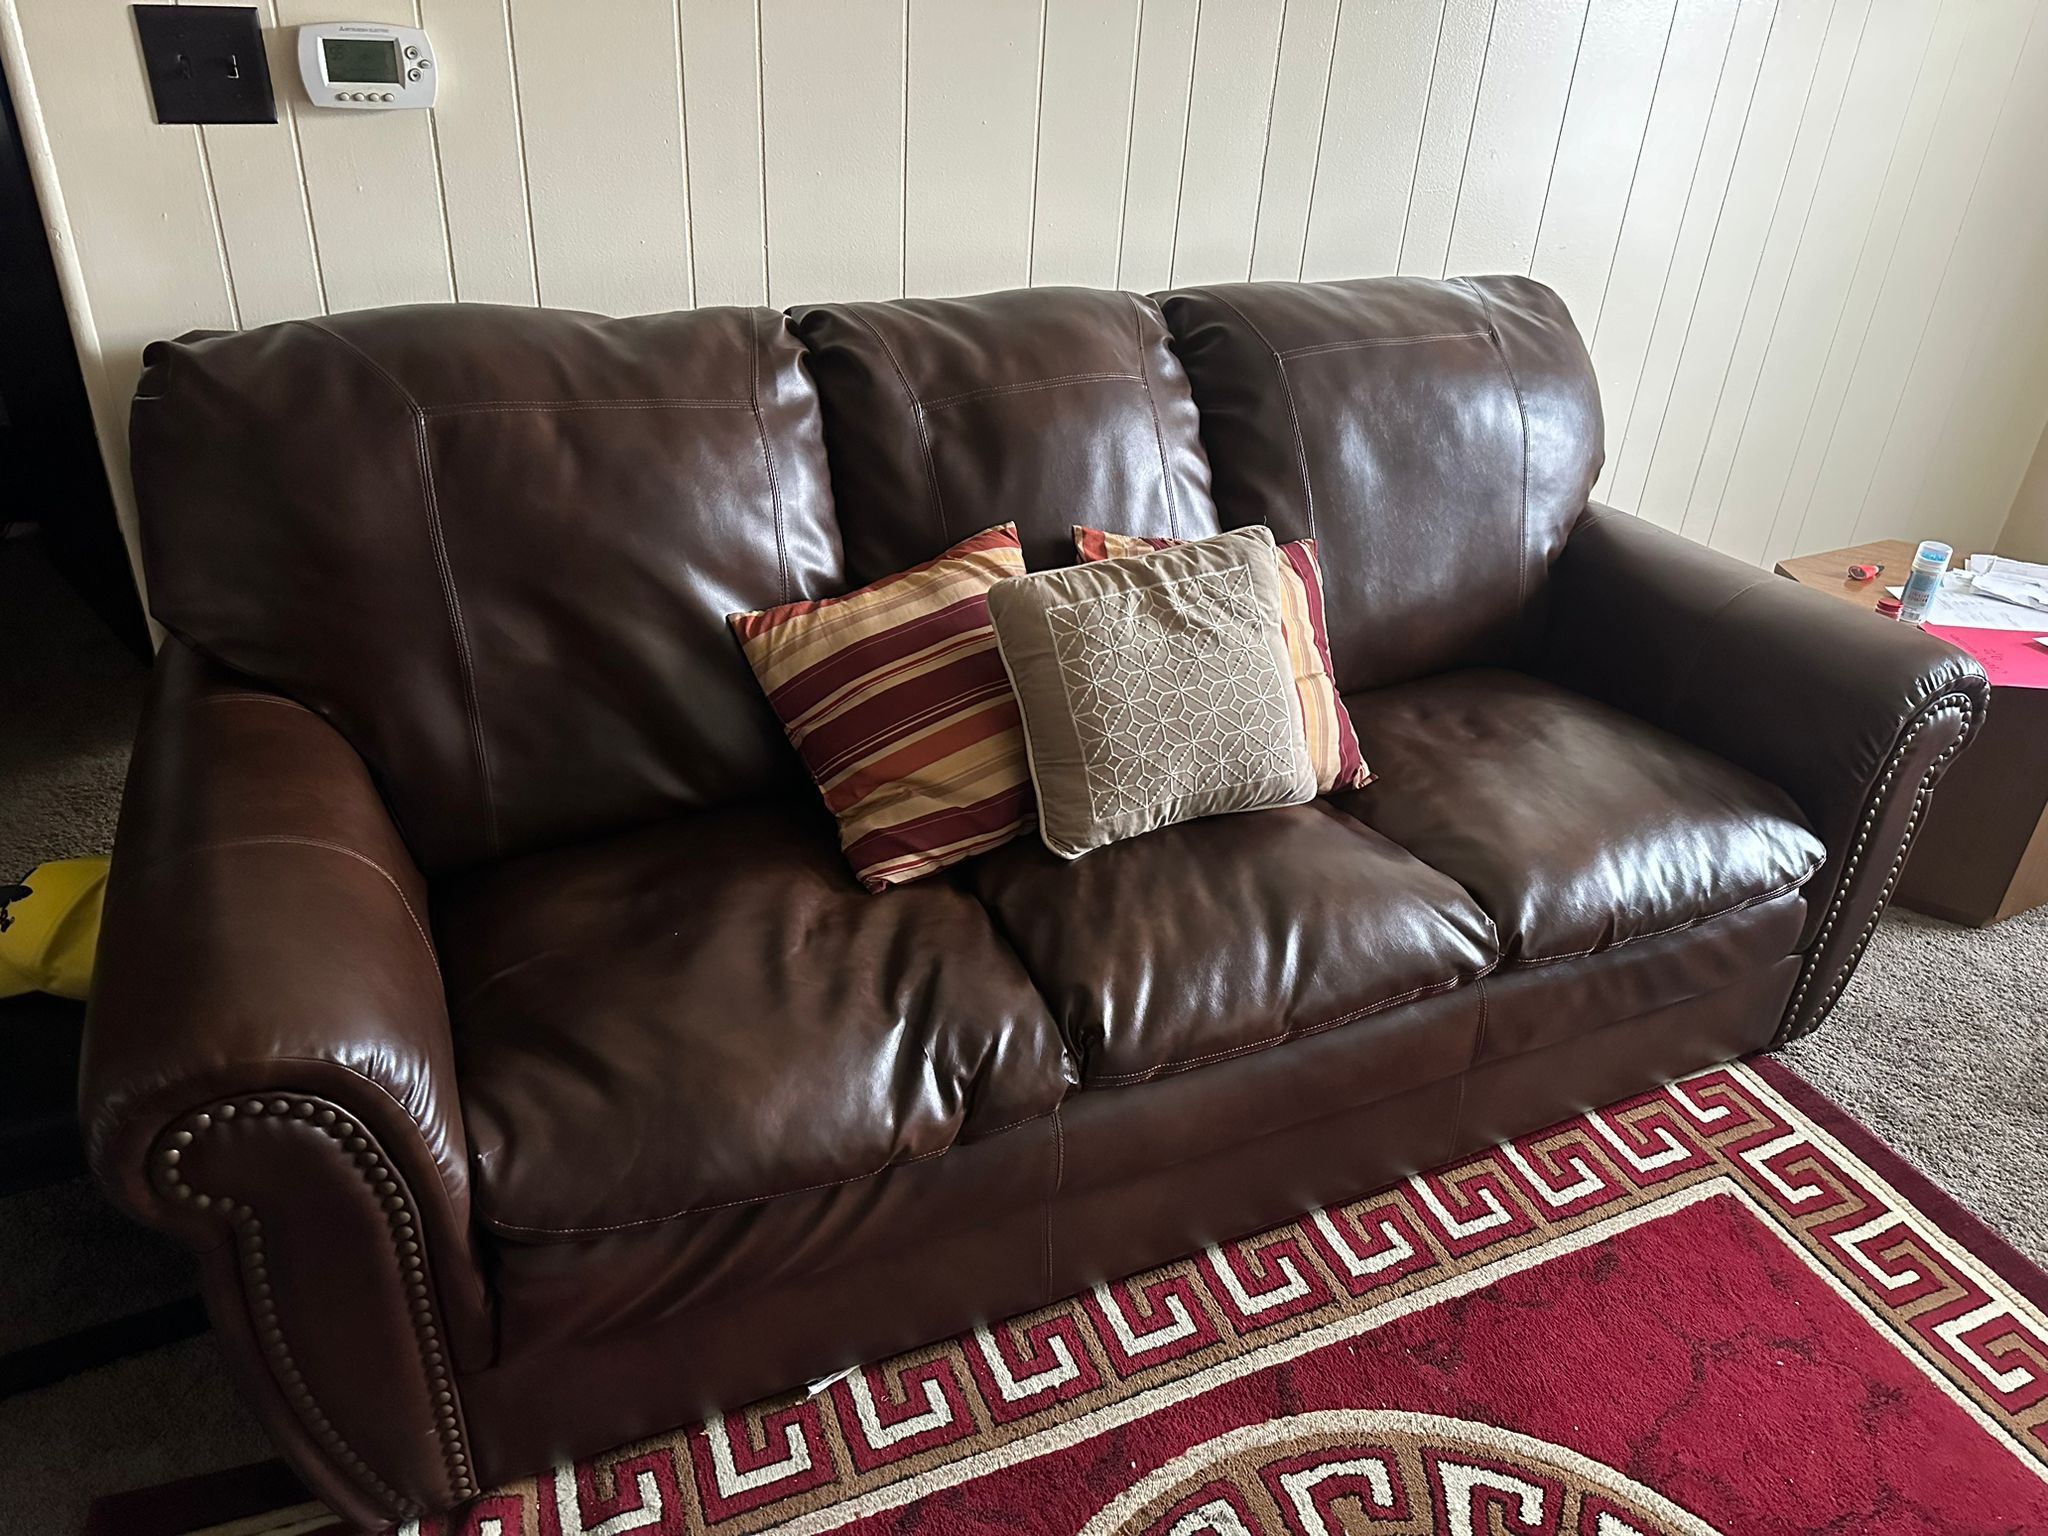 Living Room Set For $680 (Coughs, Recliner Leather Chair, 2 Small tables and Red Rug)